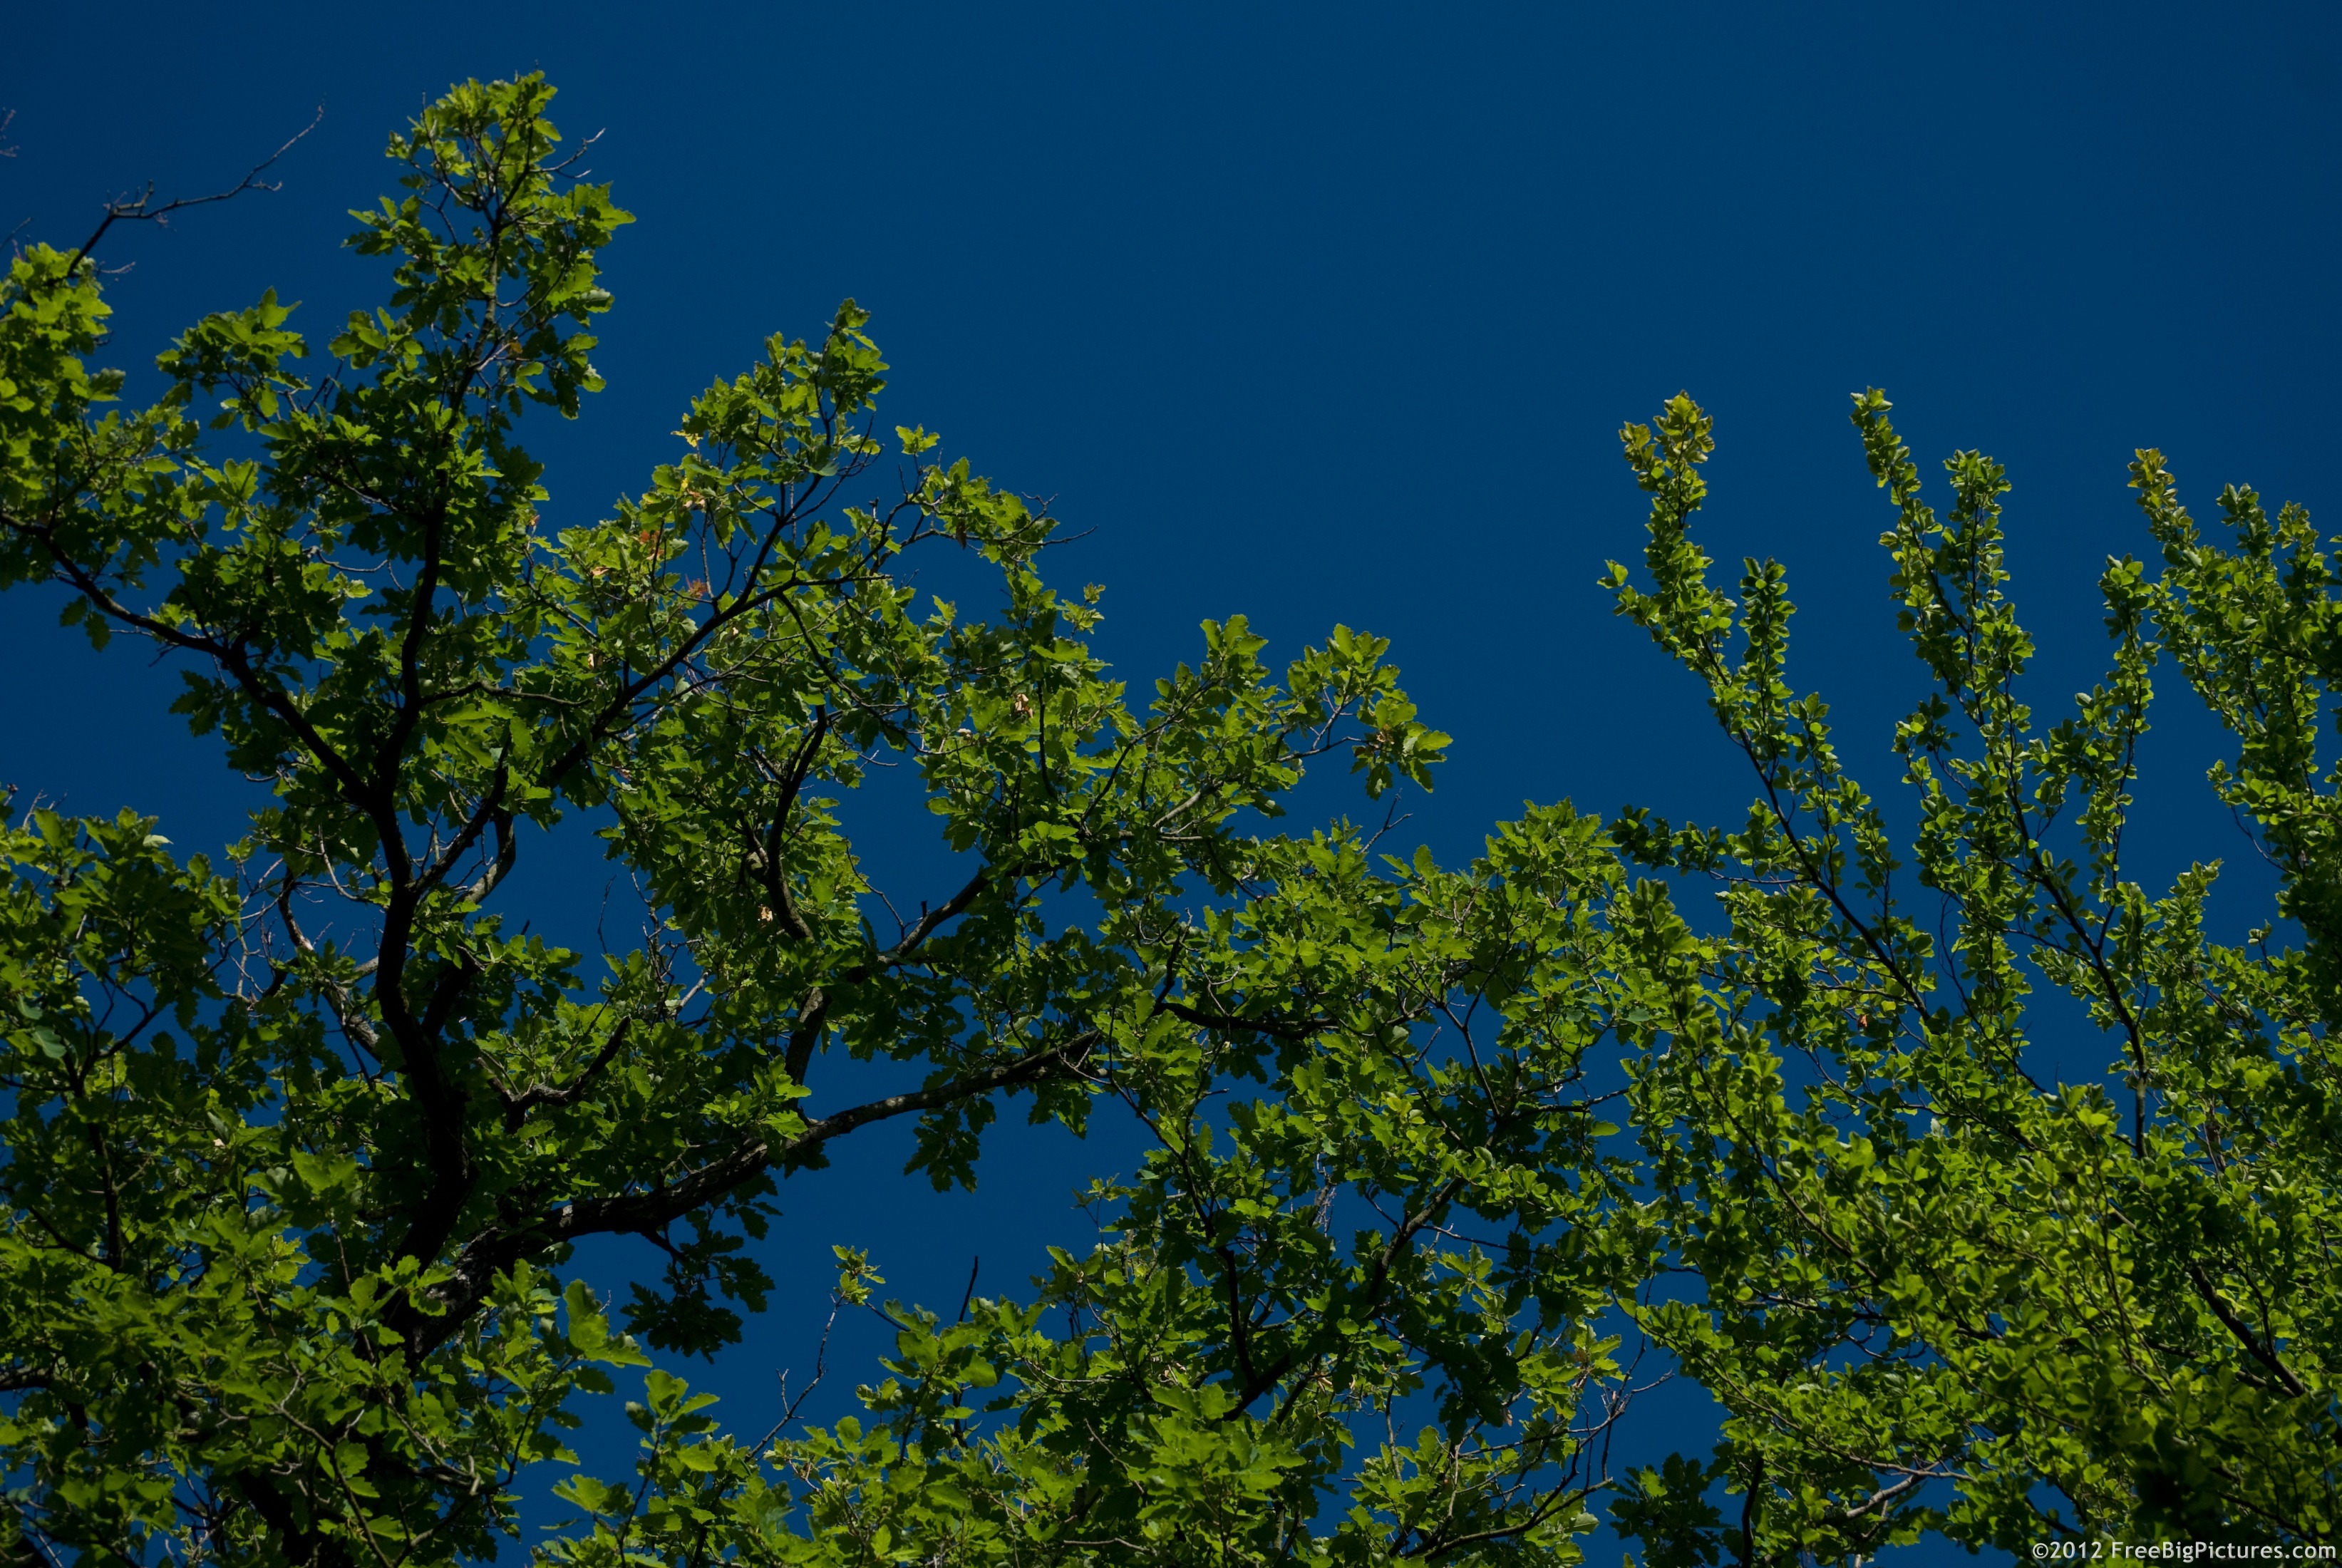 A beautiful contrast between the green foliage of trees and a pure sky